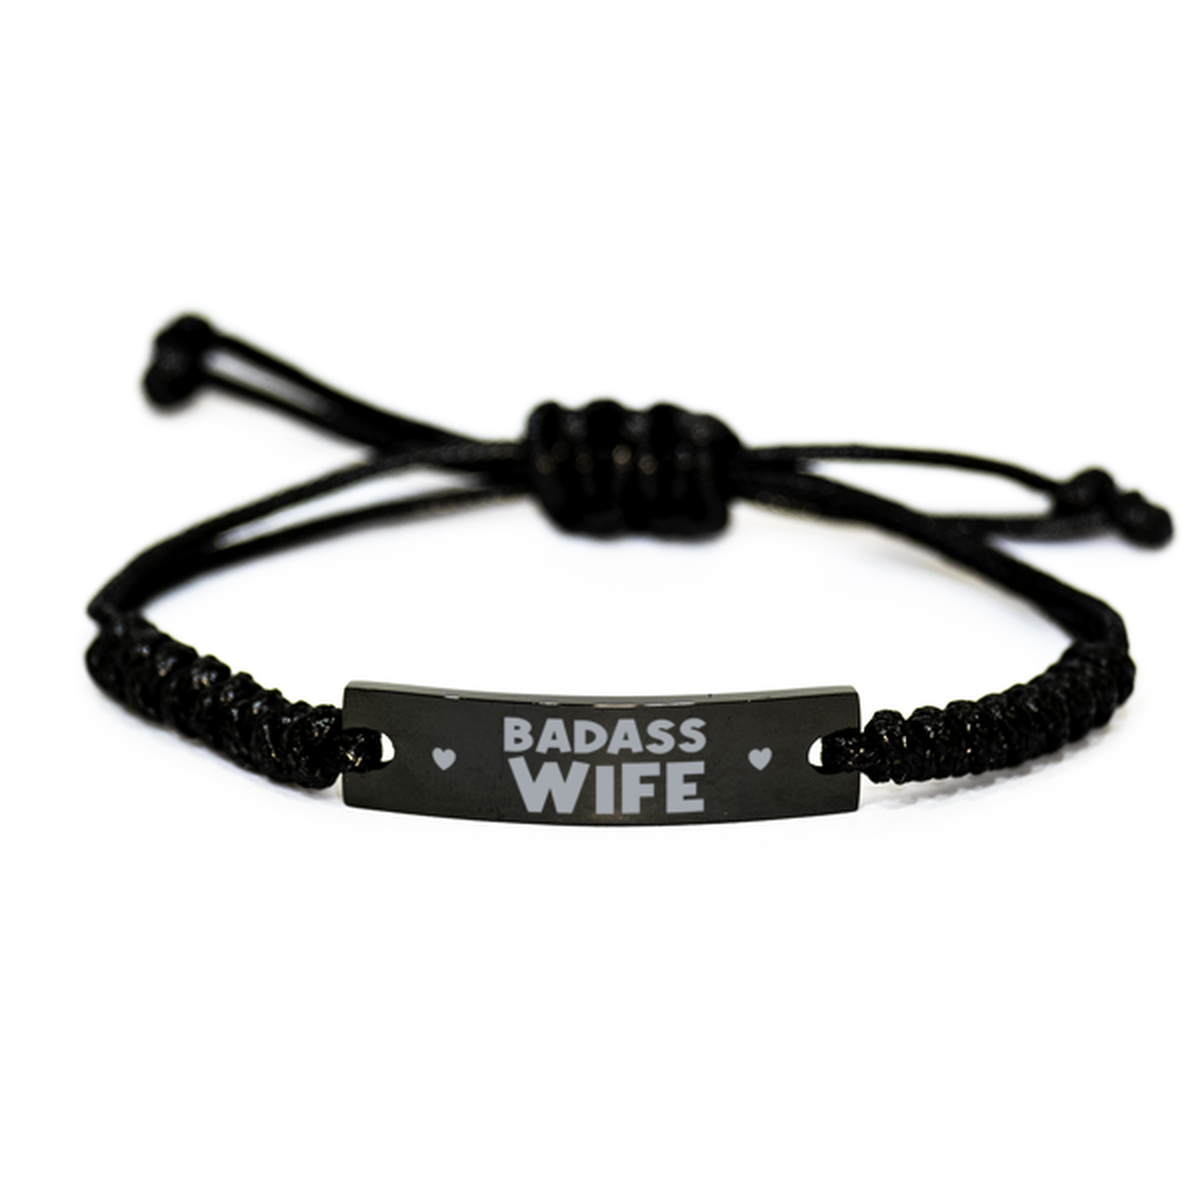 Wife Rope Bracelet, Badass Wife, Funny Family Gifts For Wife From Husband